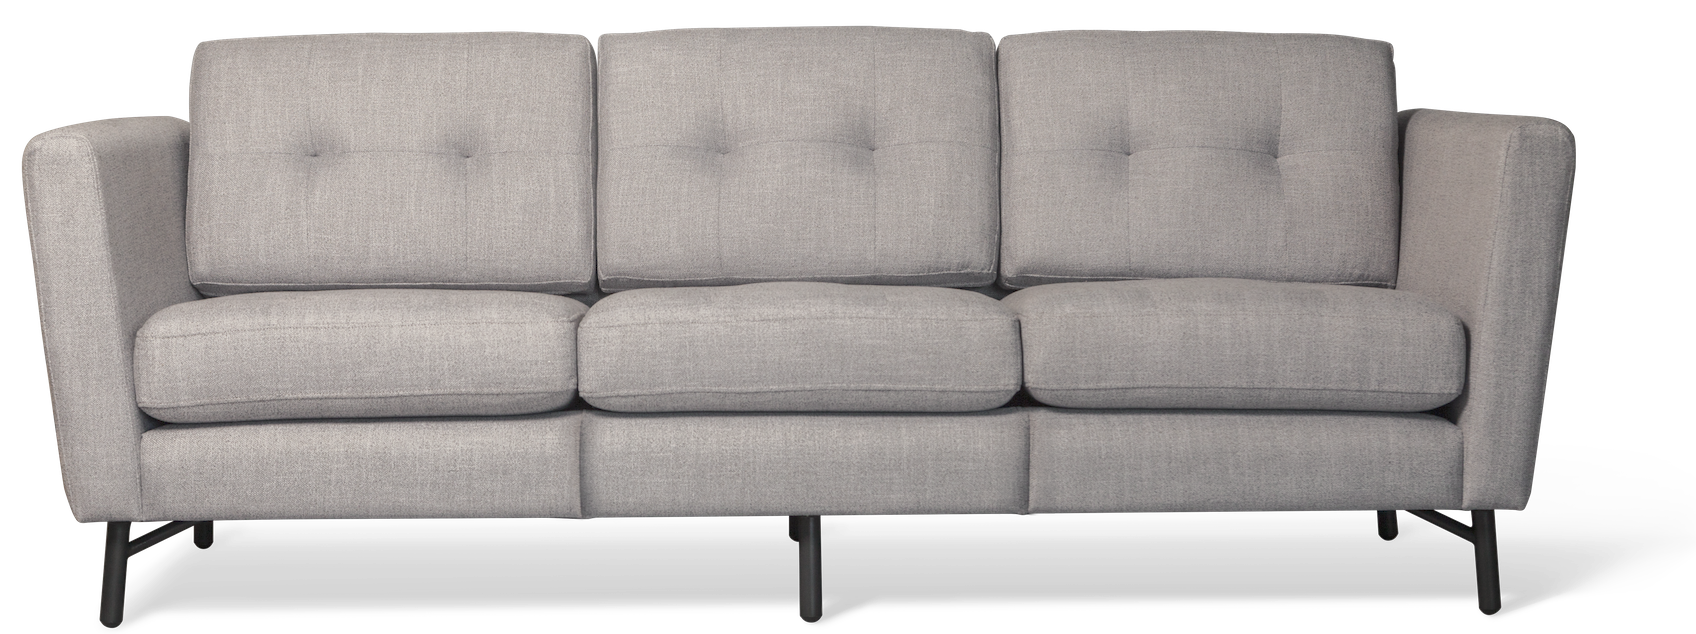 Couch Download Free Image PNG Image